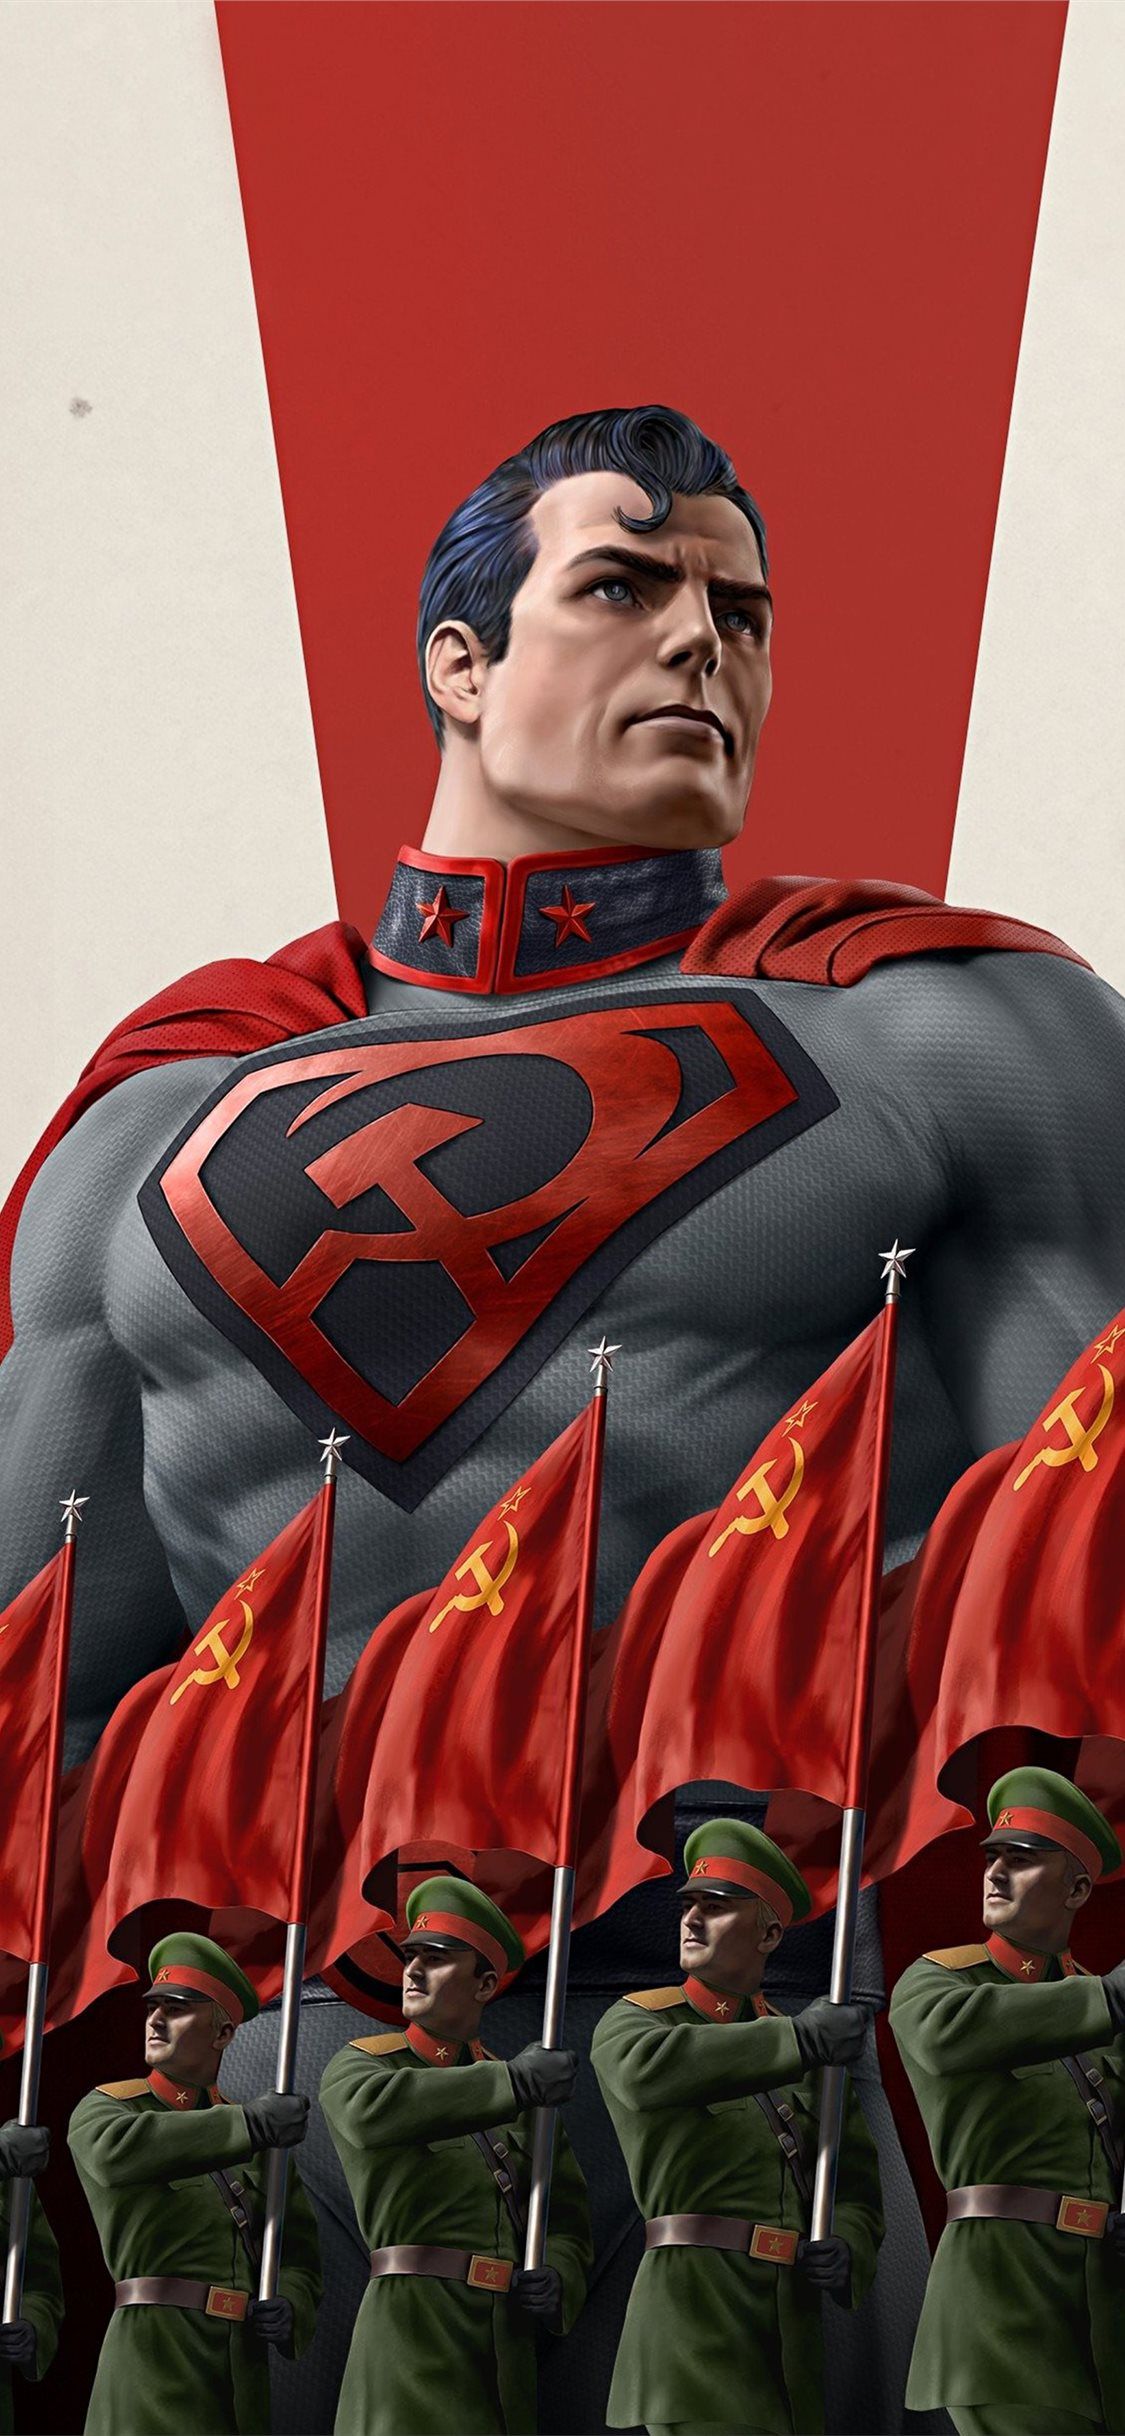 superman red son 2020 iPhone X Wallpaper Free Download